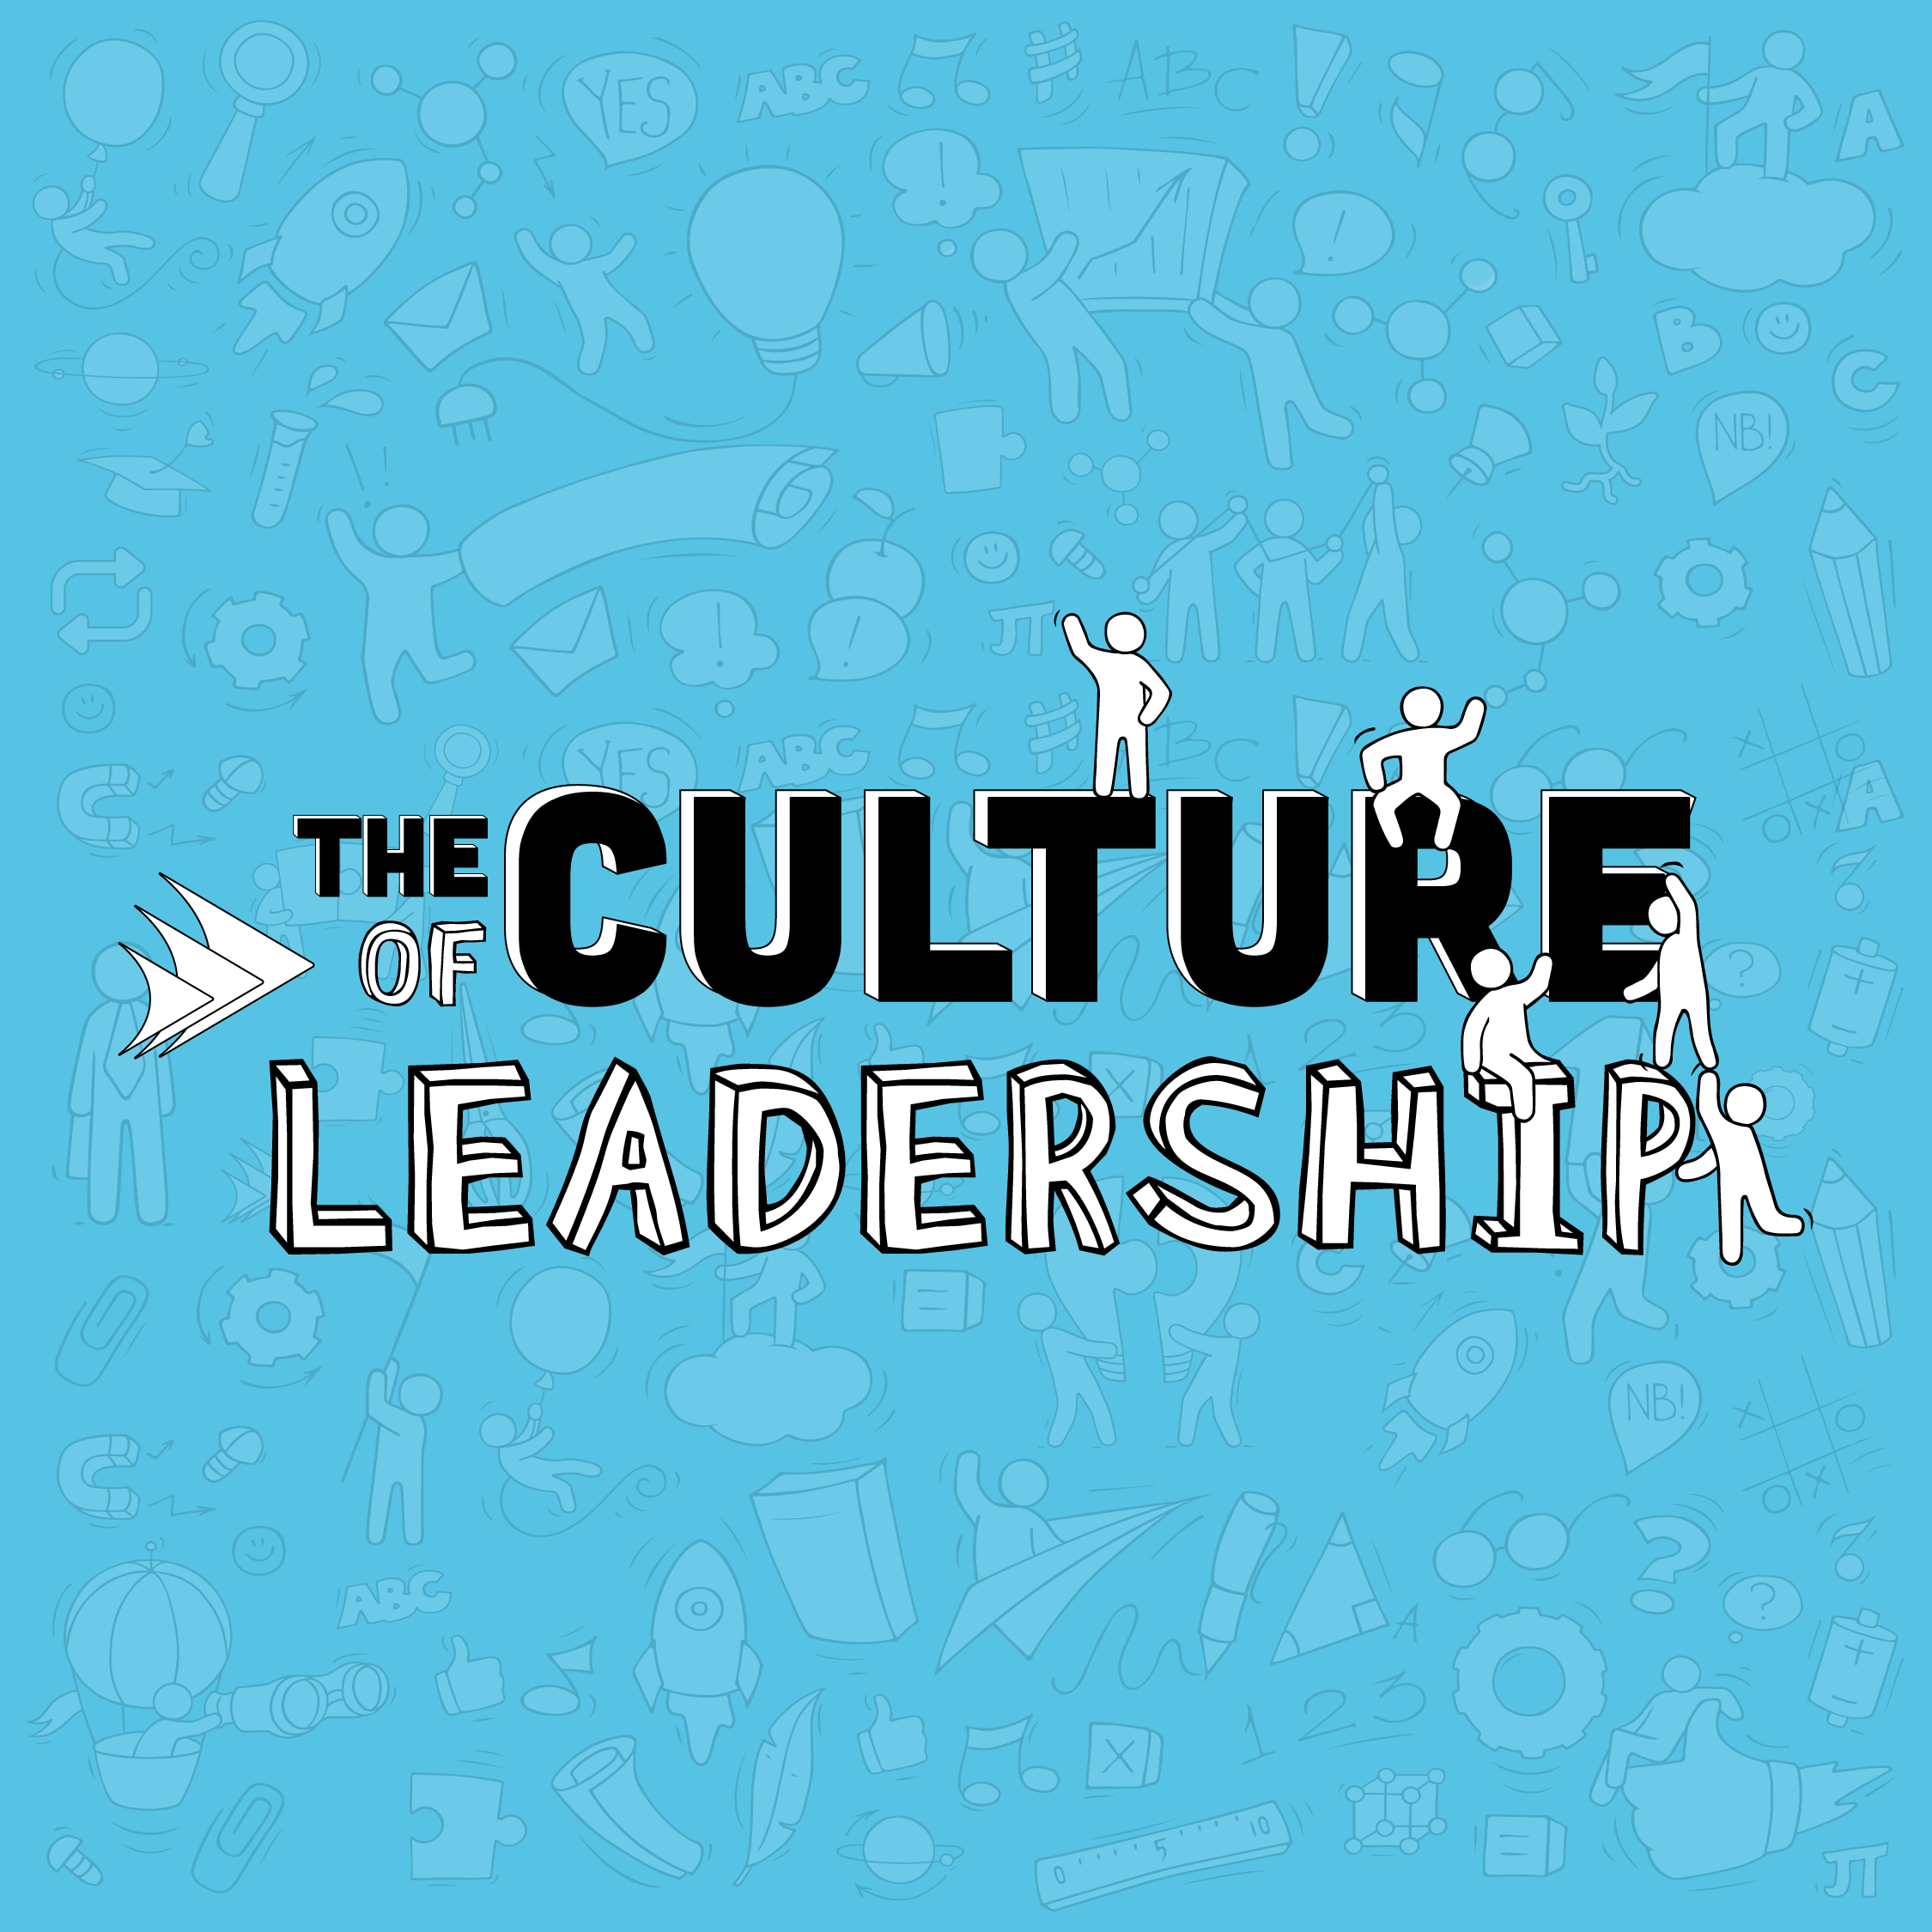 48. The Culture of The Living Organisation